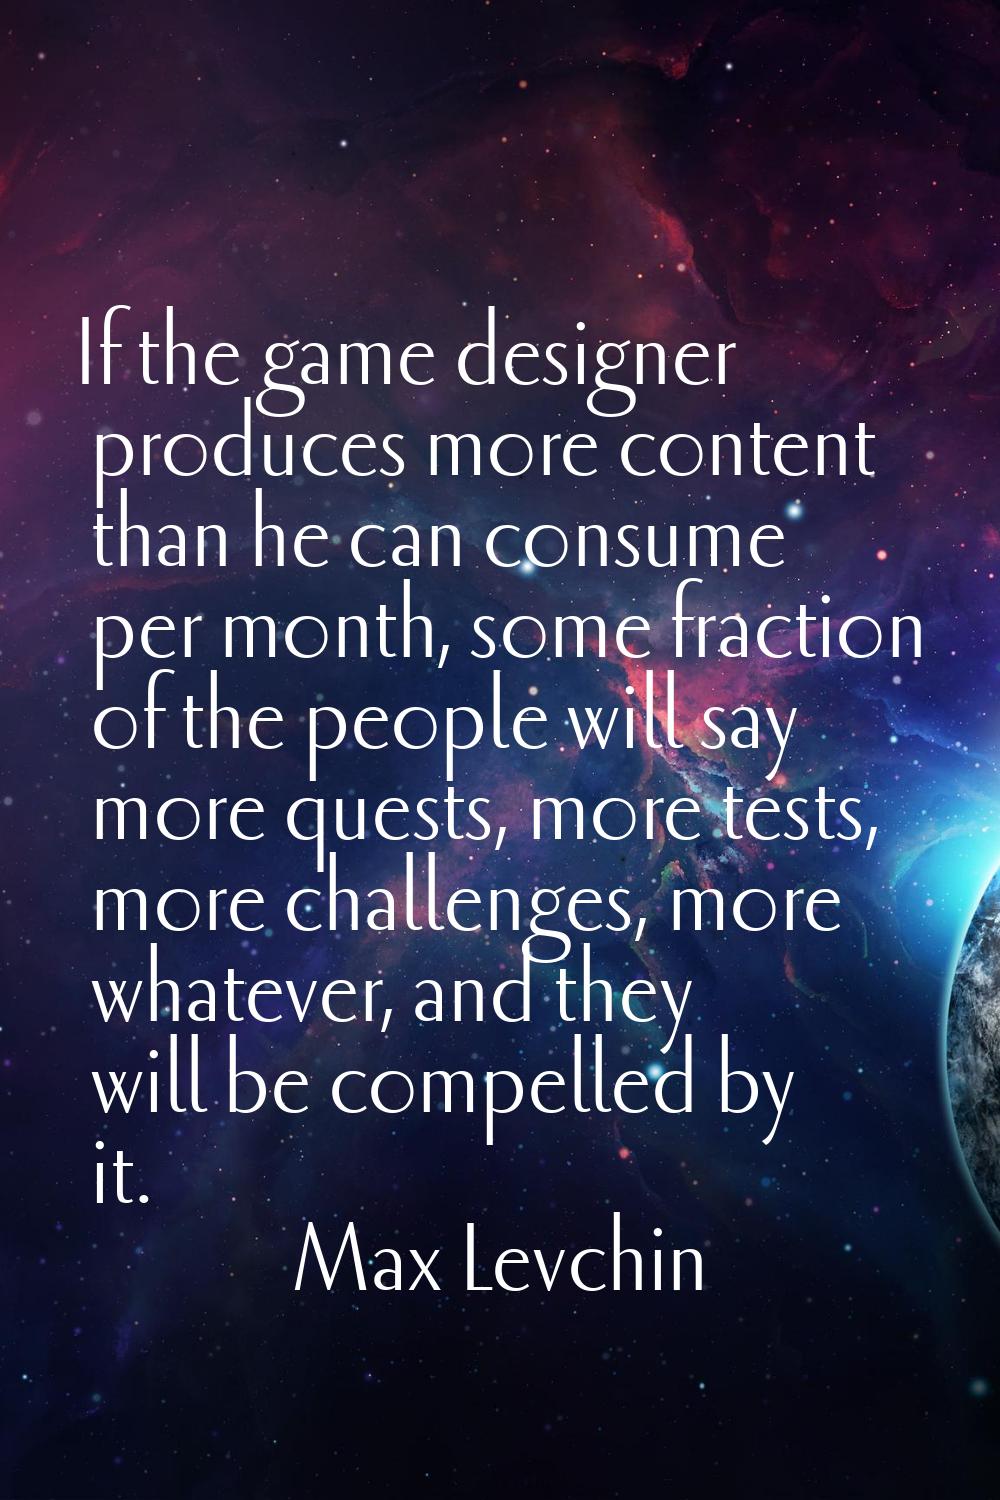 If the game designer produces more content than he can consume per month, some fraction of the peop